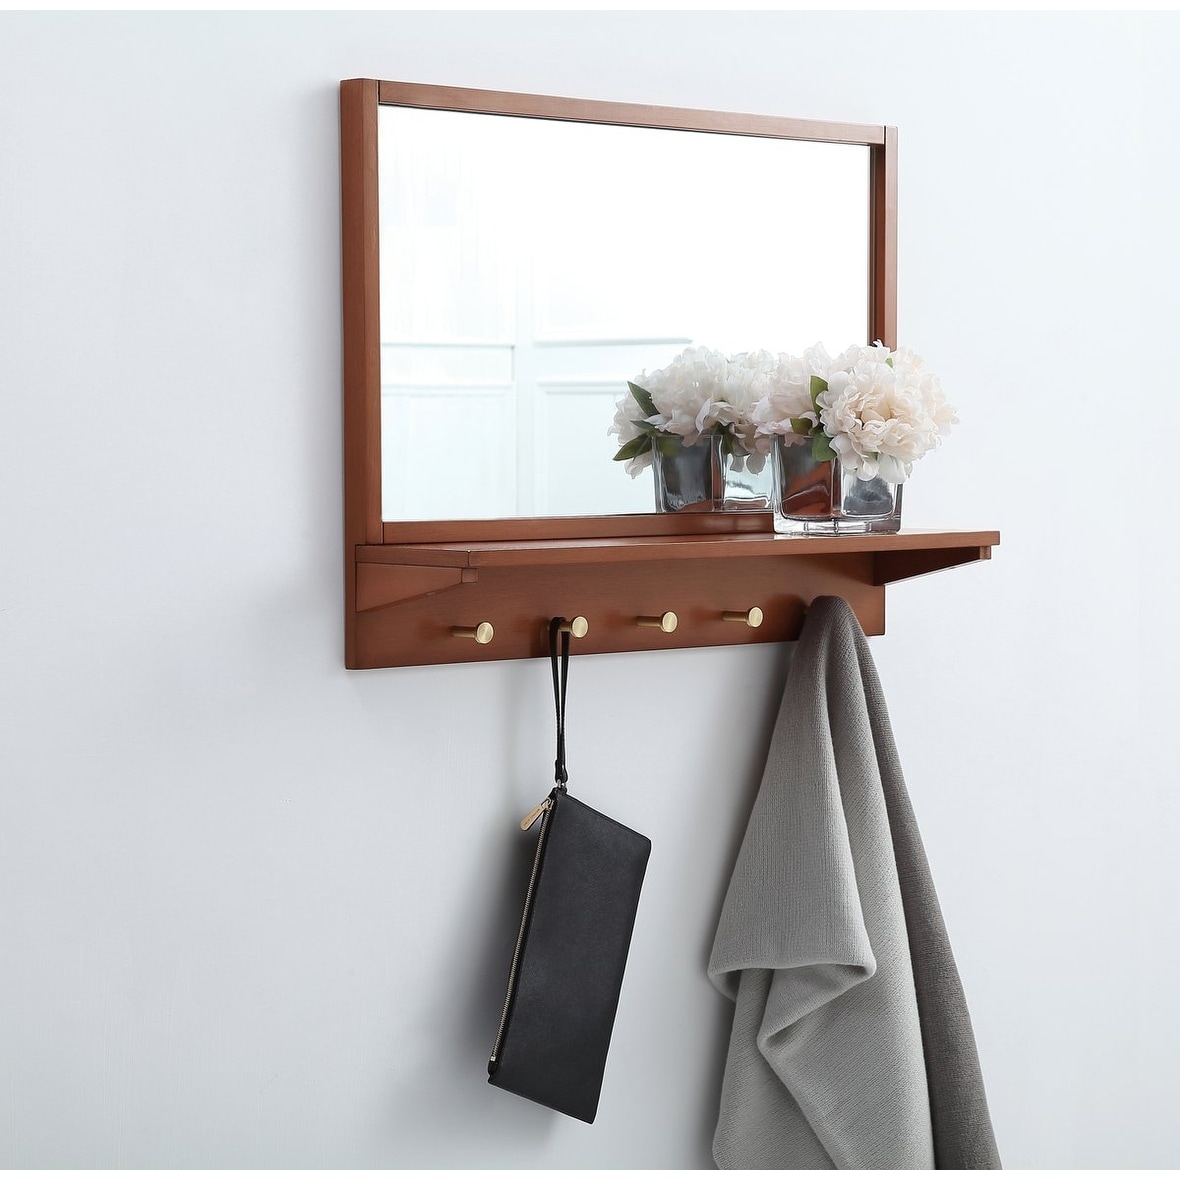 https://ak1.ostkcdn.com/images/products/is/images/direct/6a5efa6e8e98be85b9628780c191305a63fcd789/Parker-Entryway-Mirror-with-Shelf.jpg